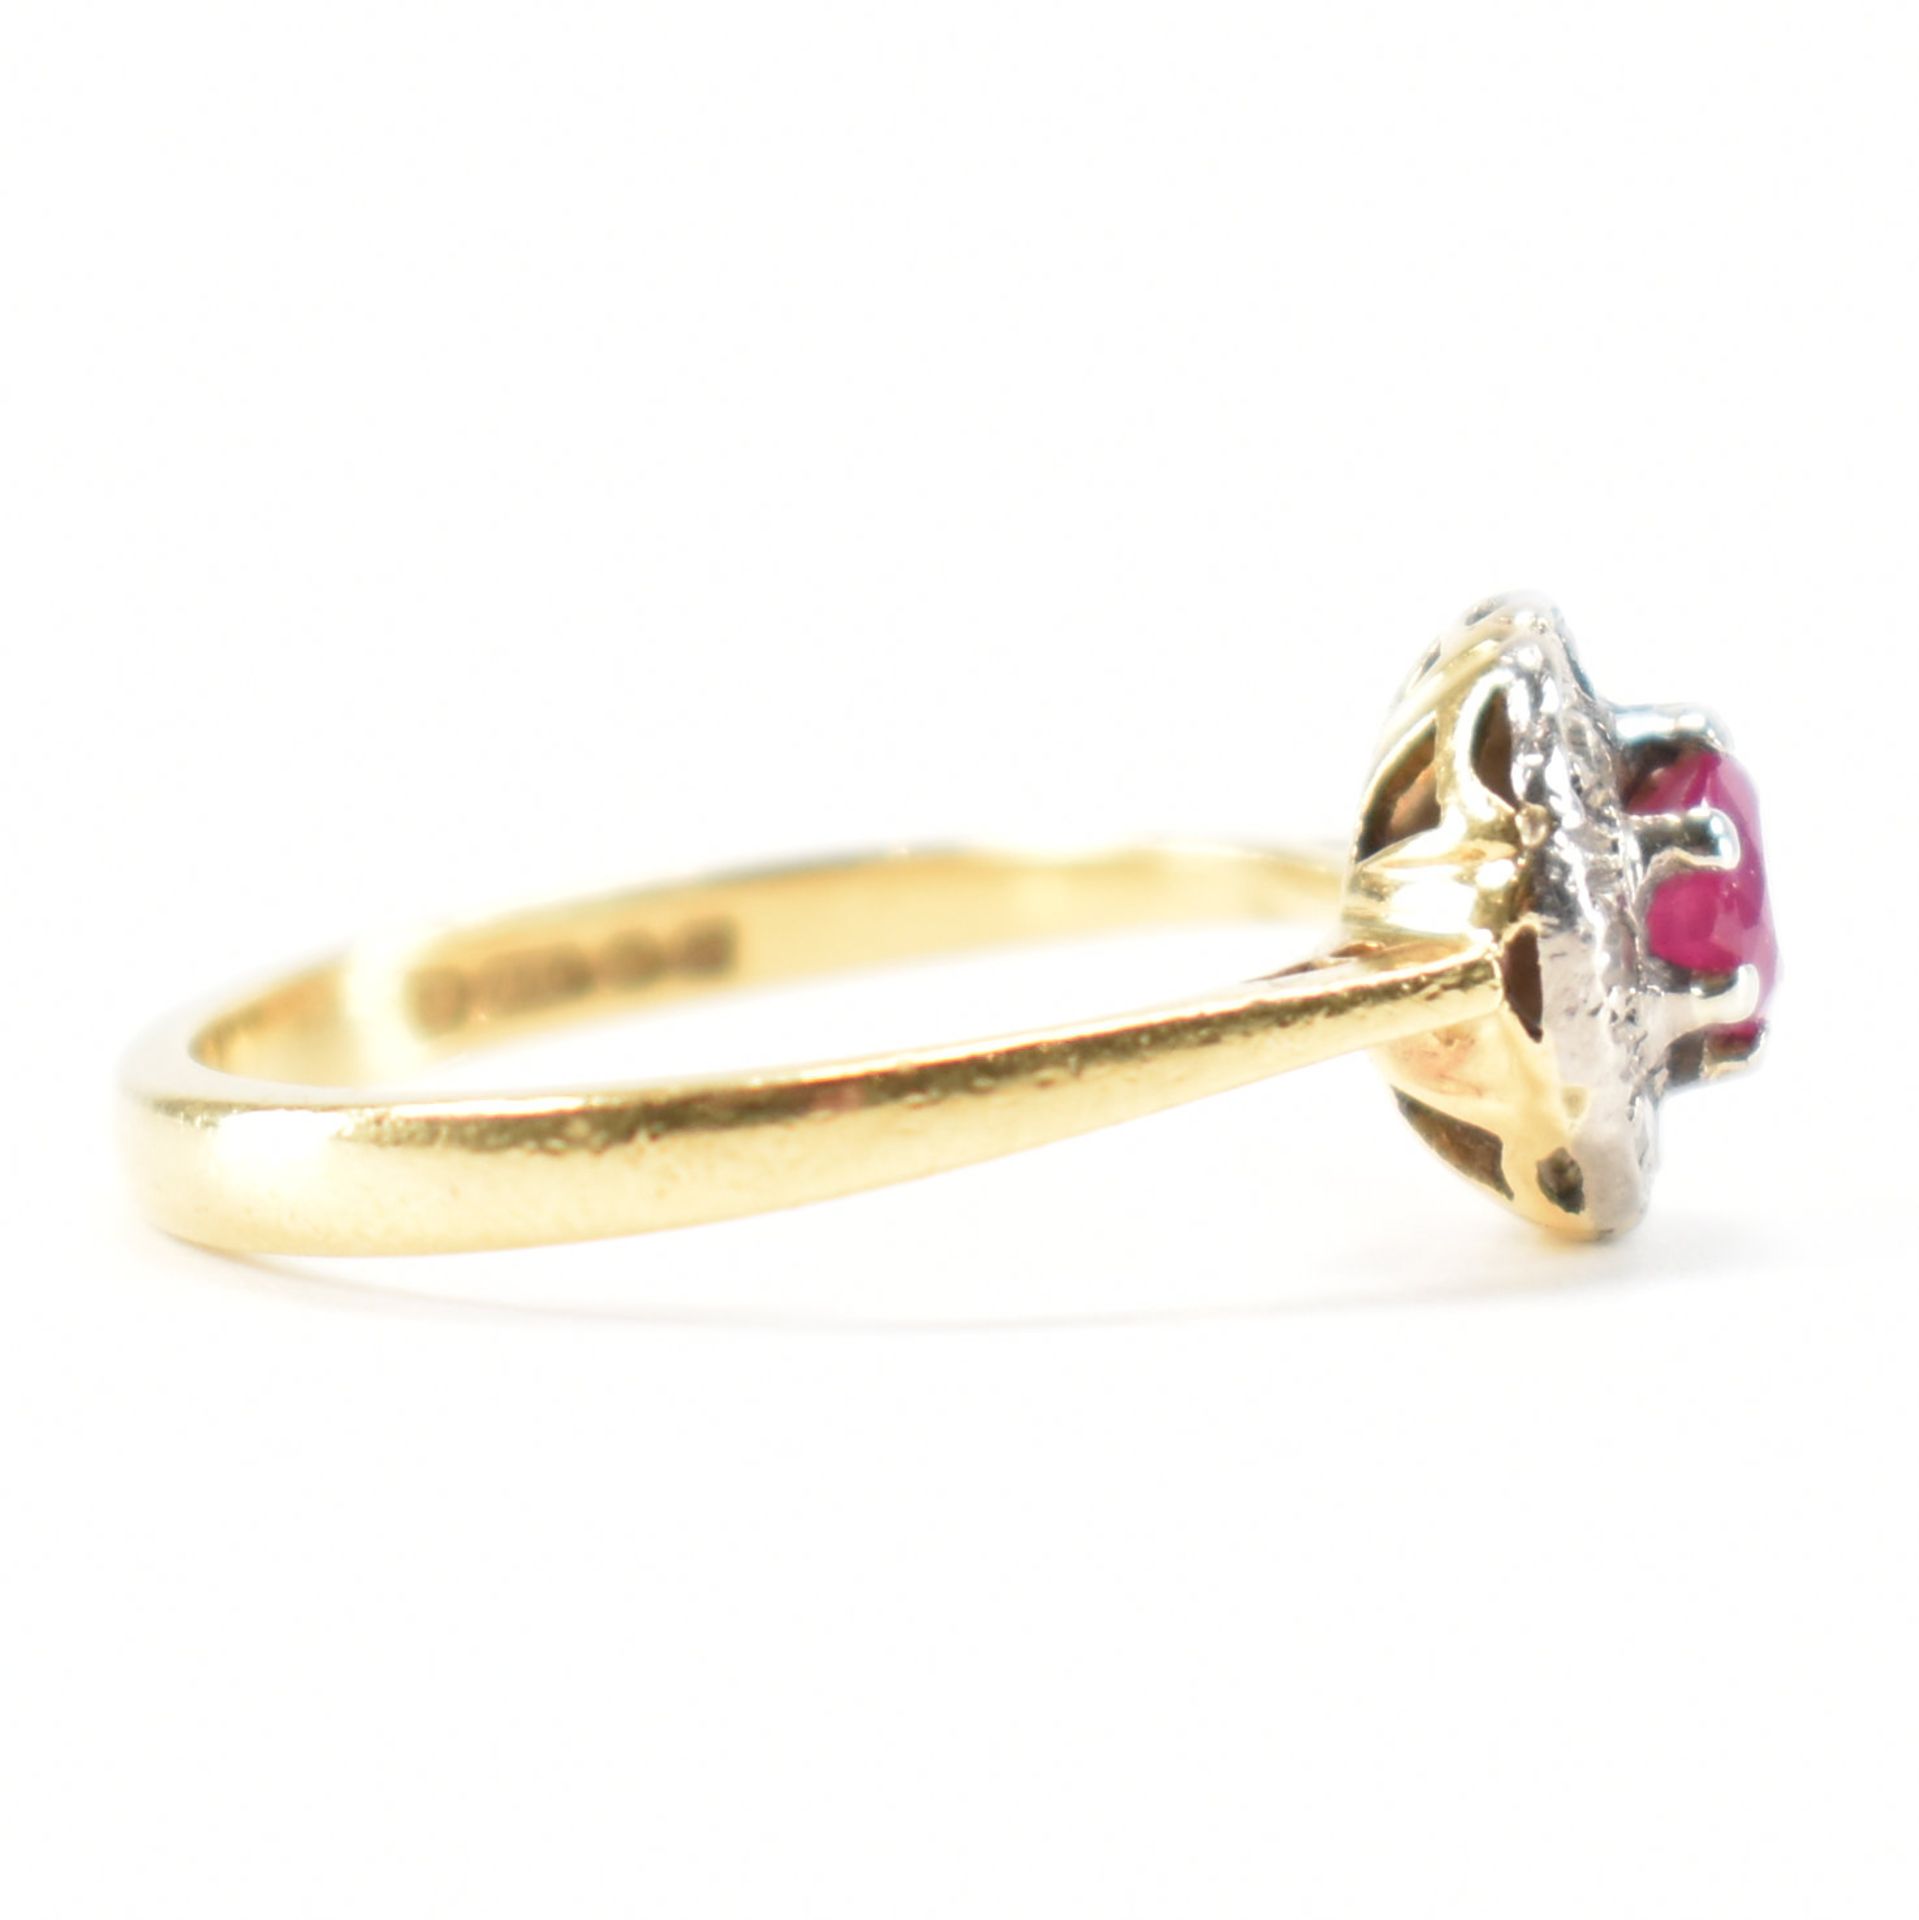 HALLMARKED 18CT GOLD RUBY & DIAMOND CLUSTER RING - Image 5 of 9